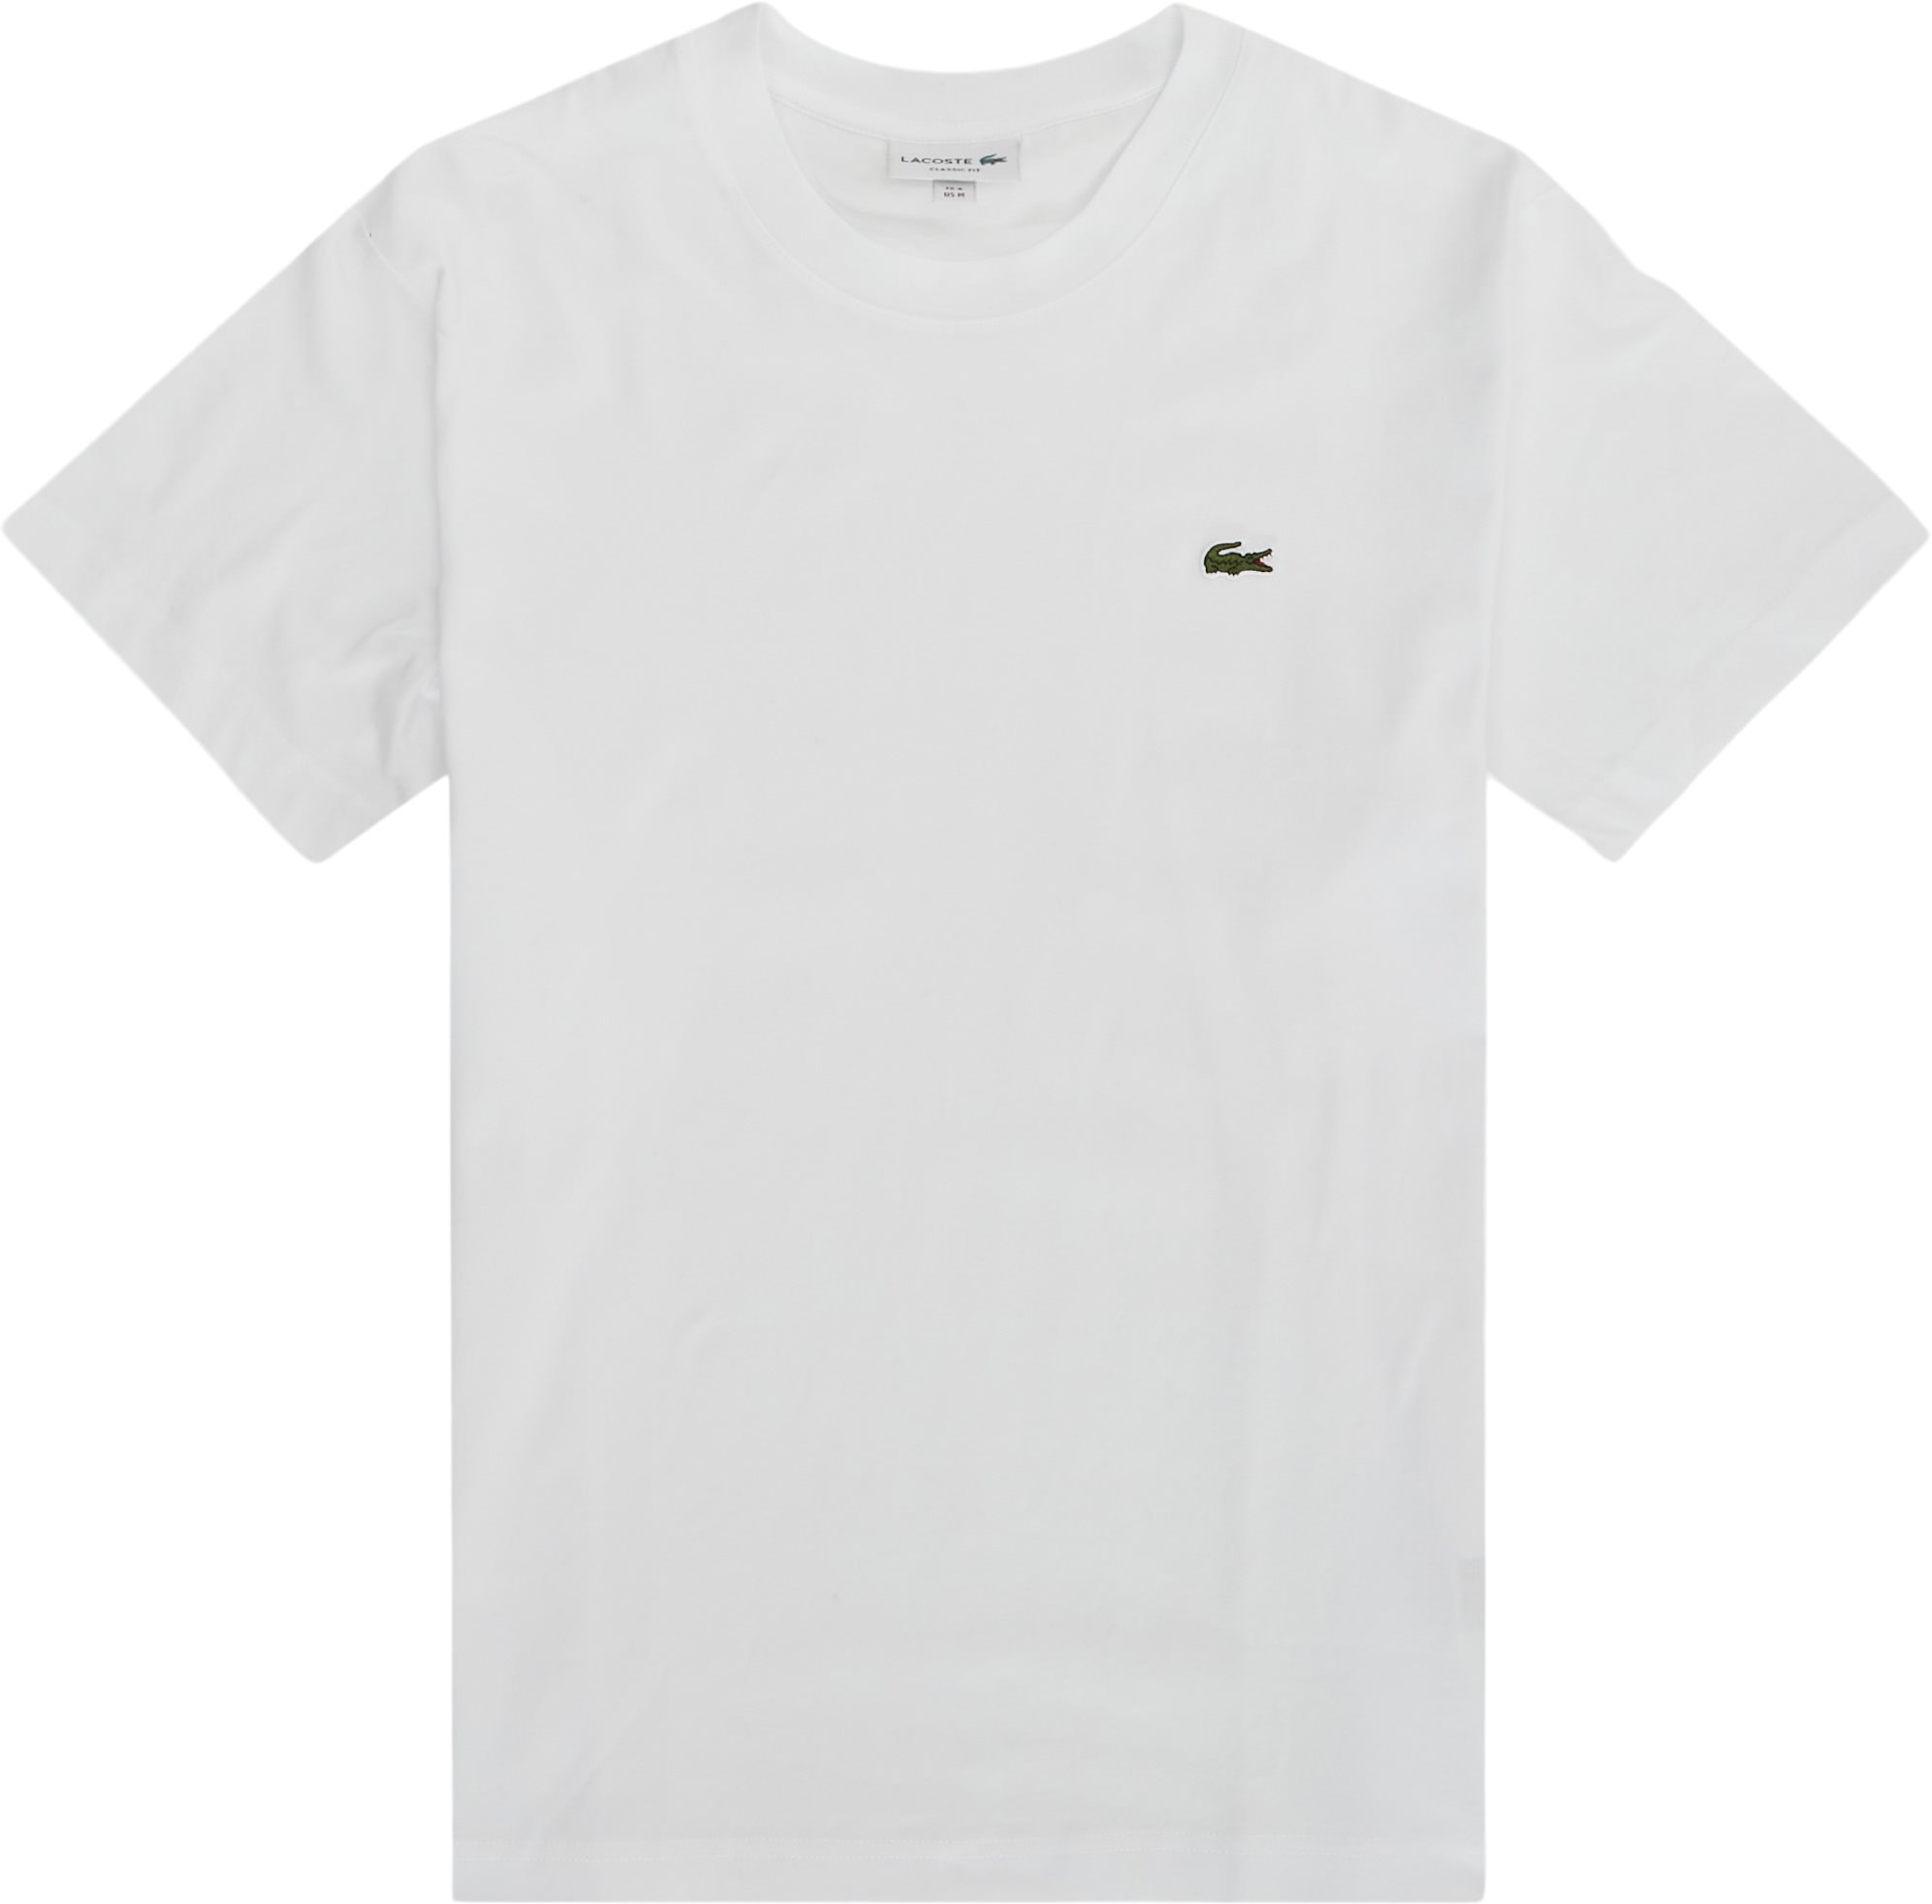 Lacoste T-shirts TH7318 2401 White